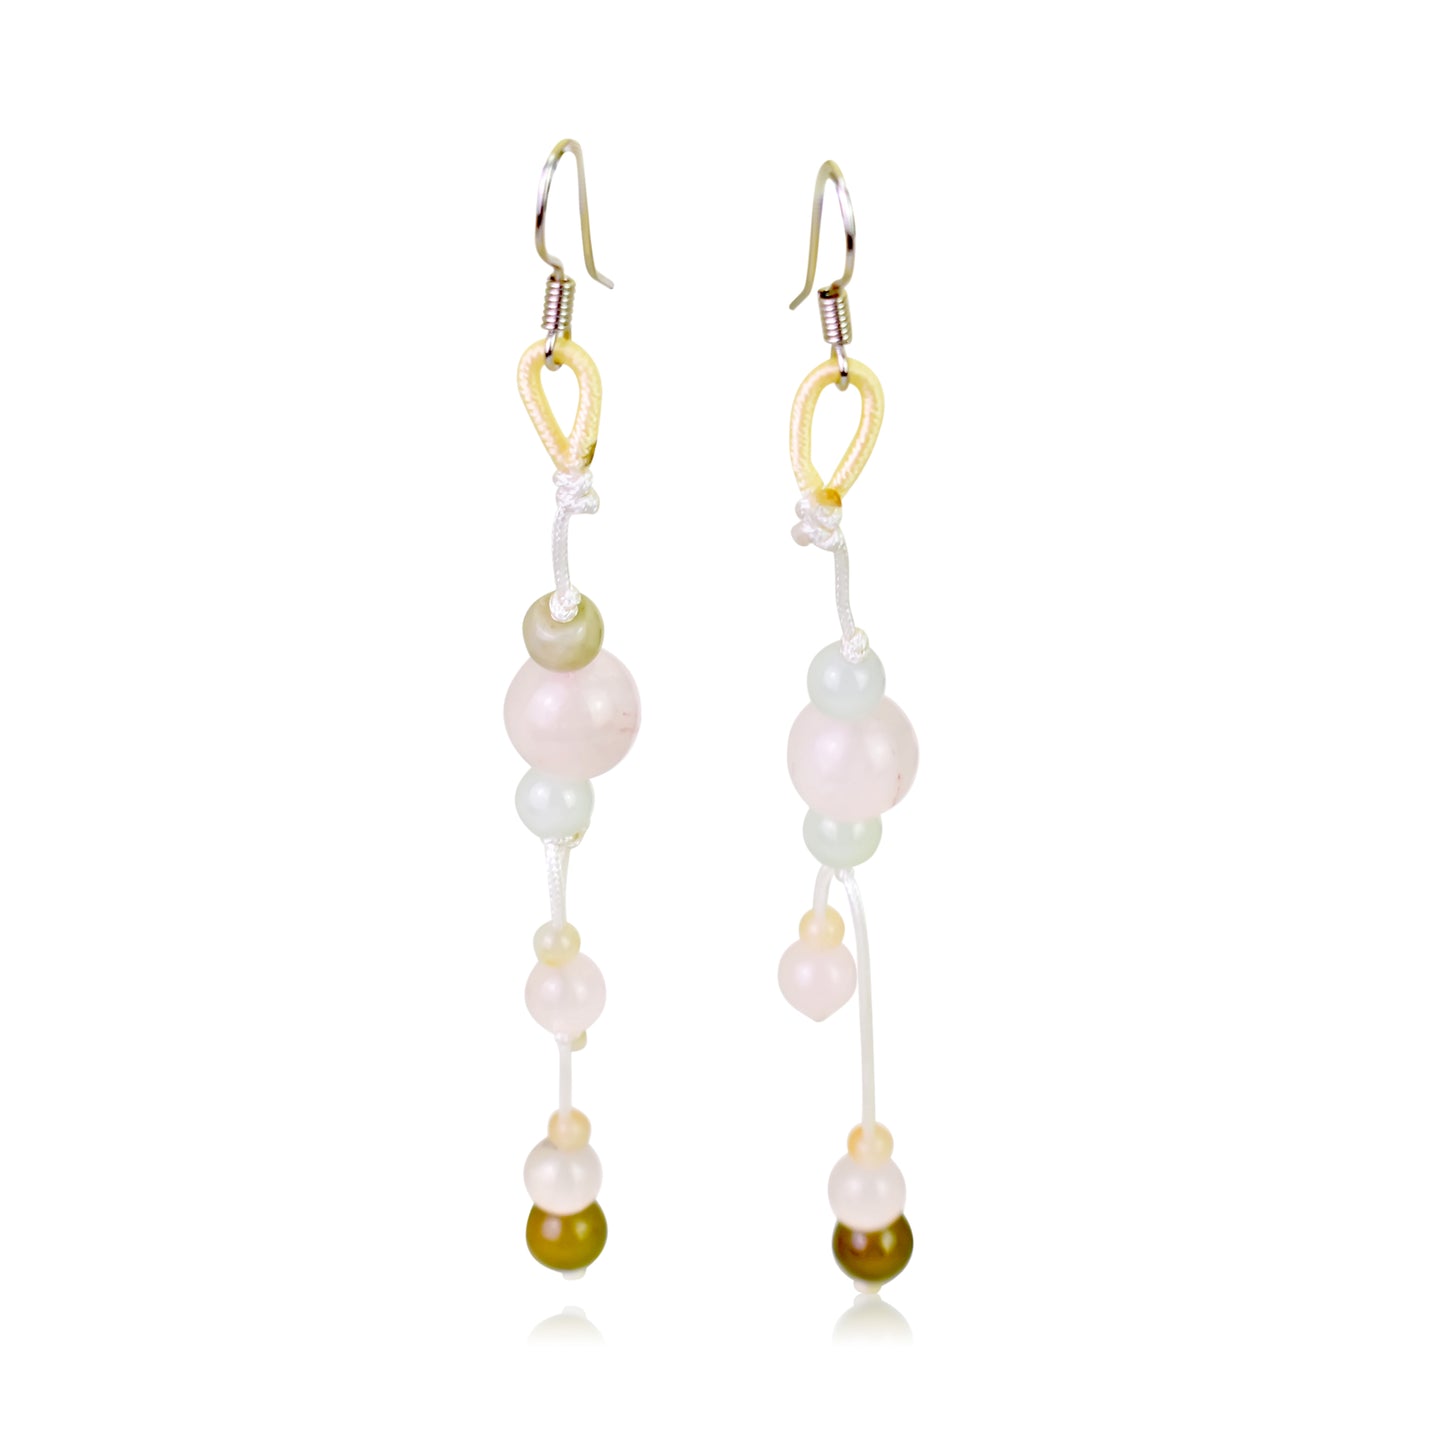 Add a Splash of Color with Irresistible Rose Quartz Beads Earrings made with White Cord